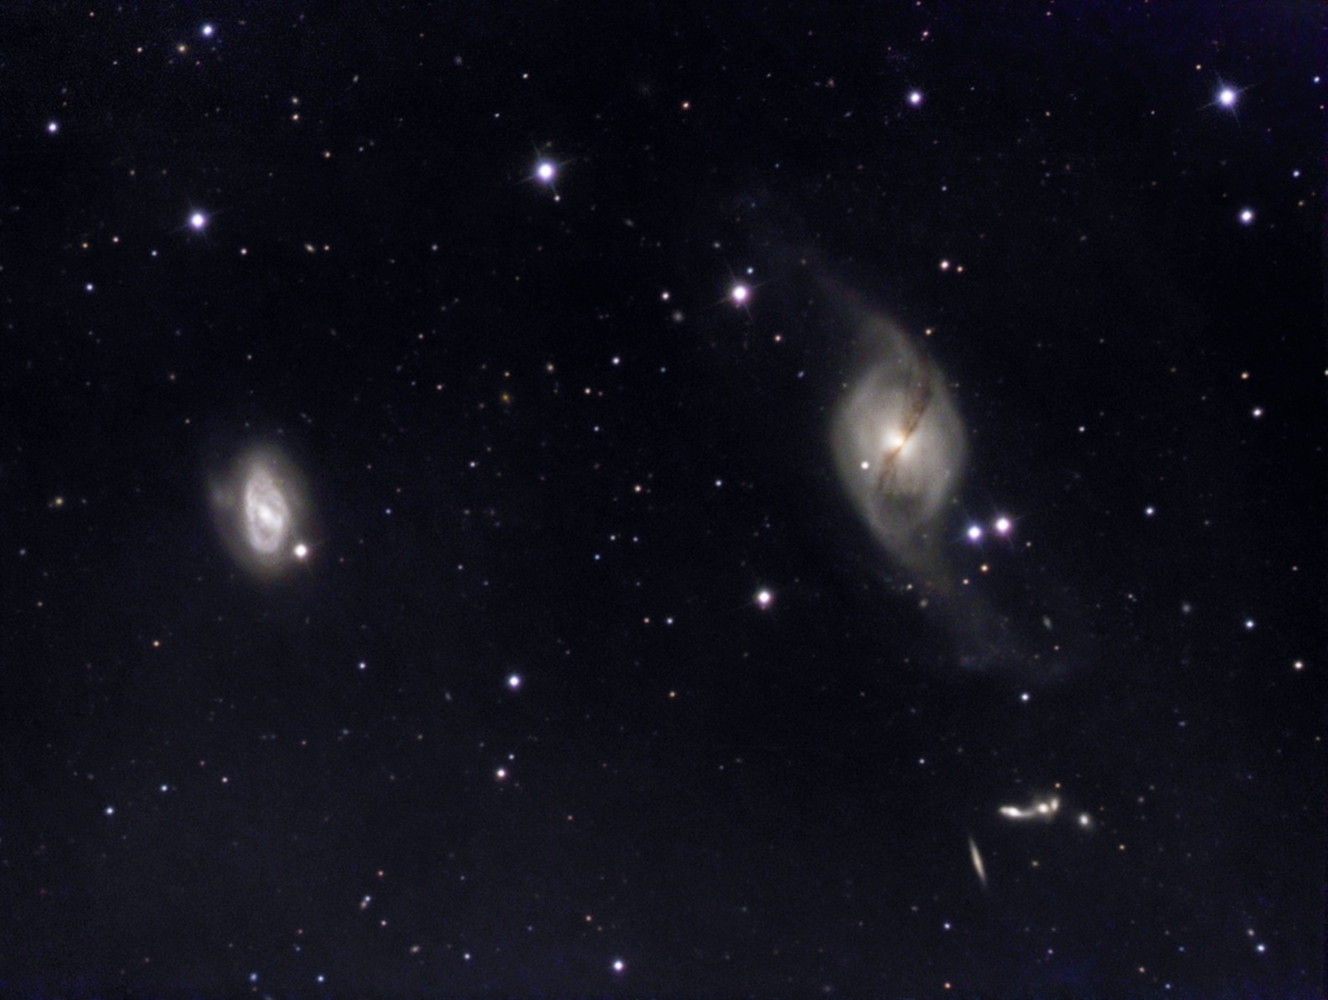 NGC 3718 from BMV Observatories